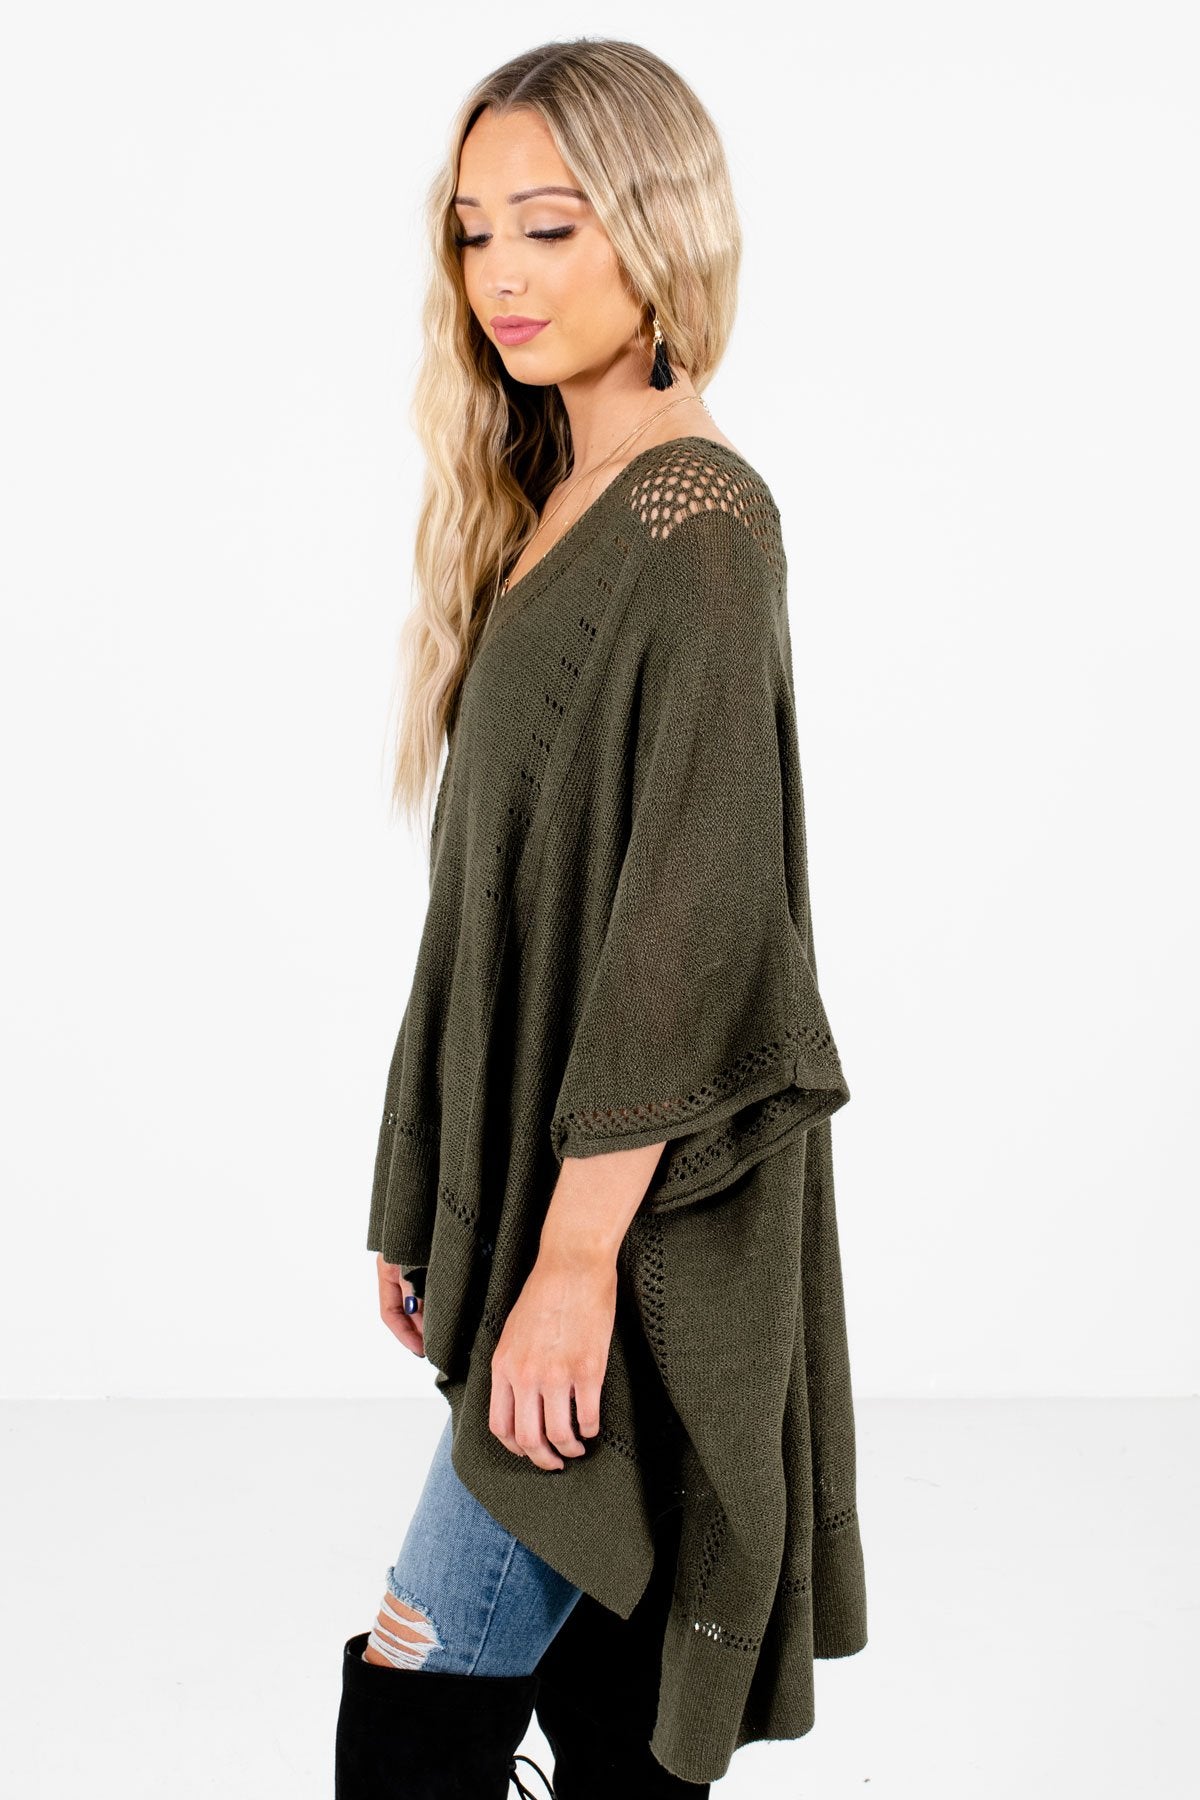 Olive Green Layering Boutique Ponchos for Women